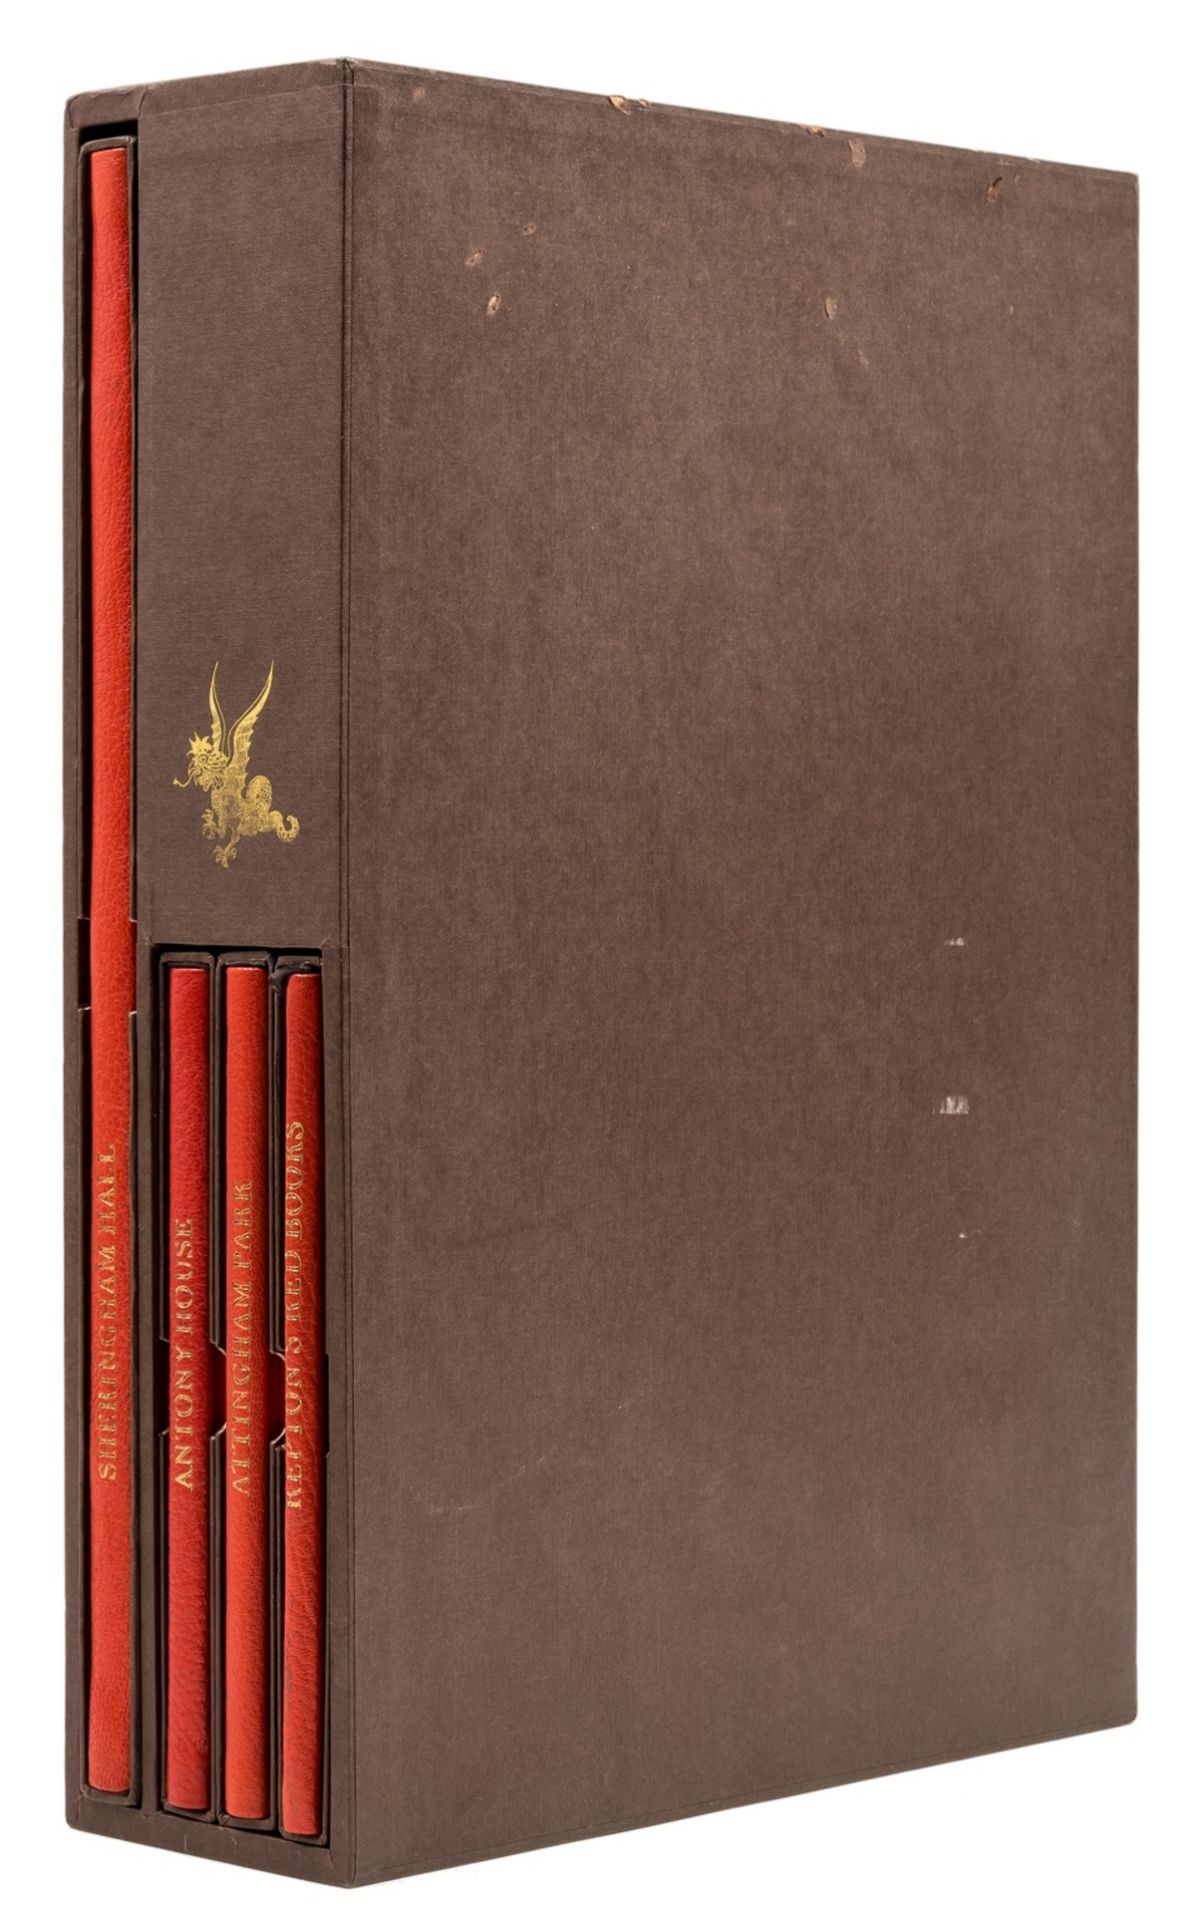 Repton (Humphry).- Malins (Edward) The Red Books of Humphry Repton, 4 vol., Basilisk Press, 1976.